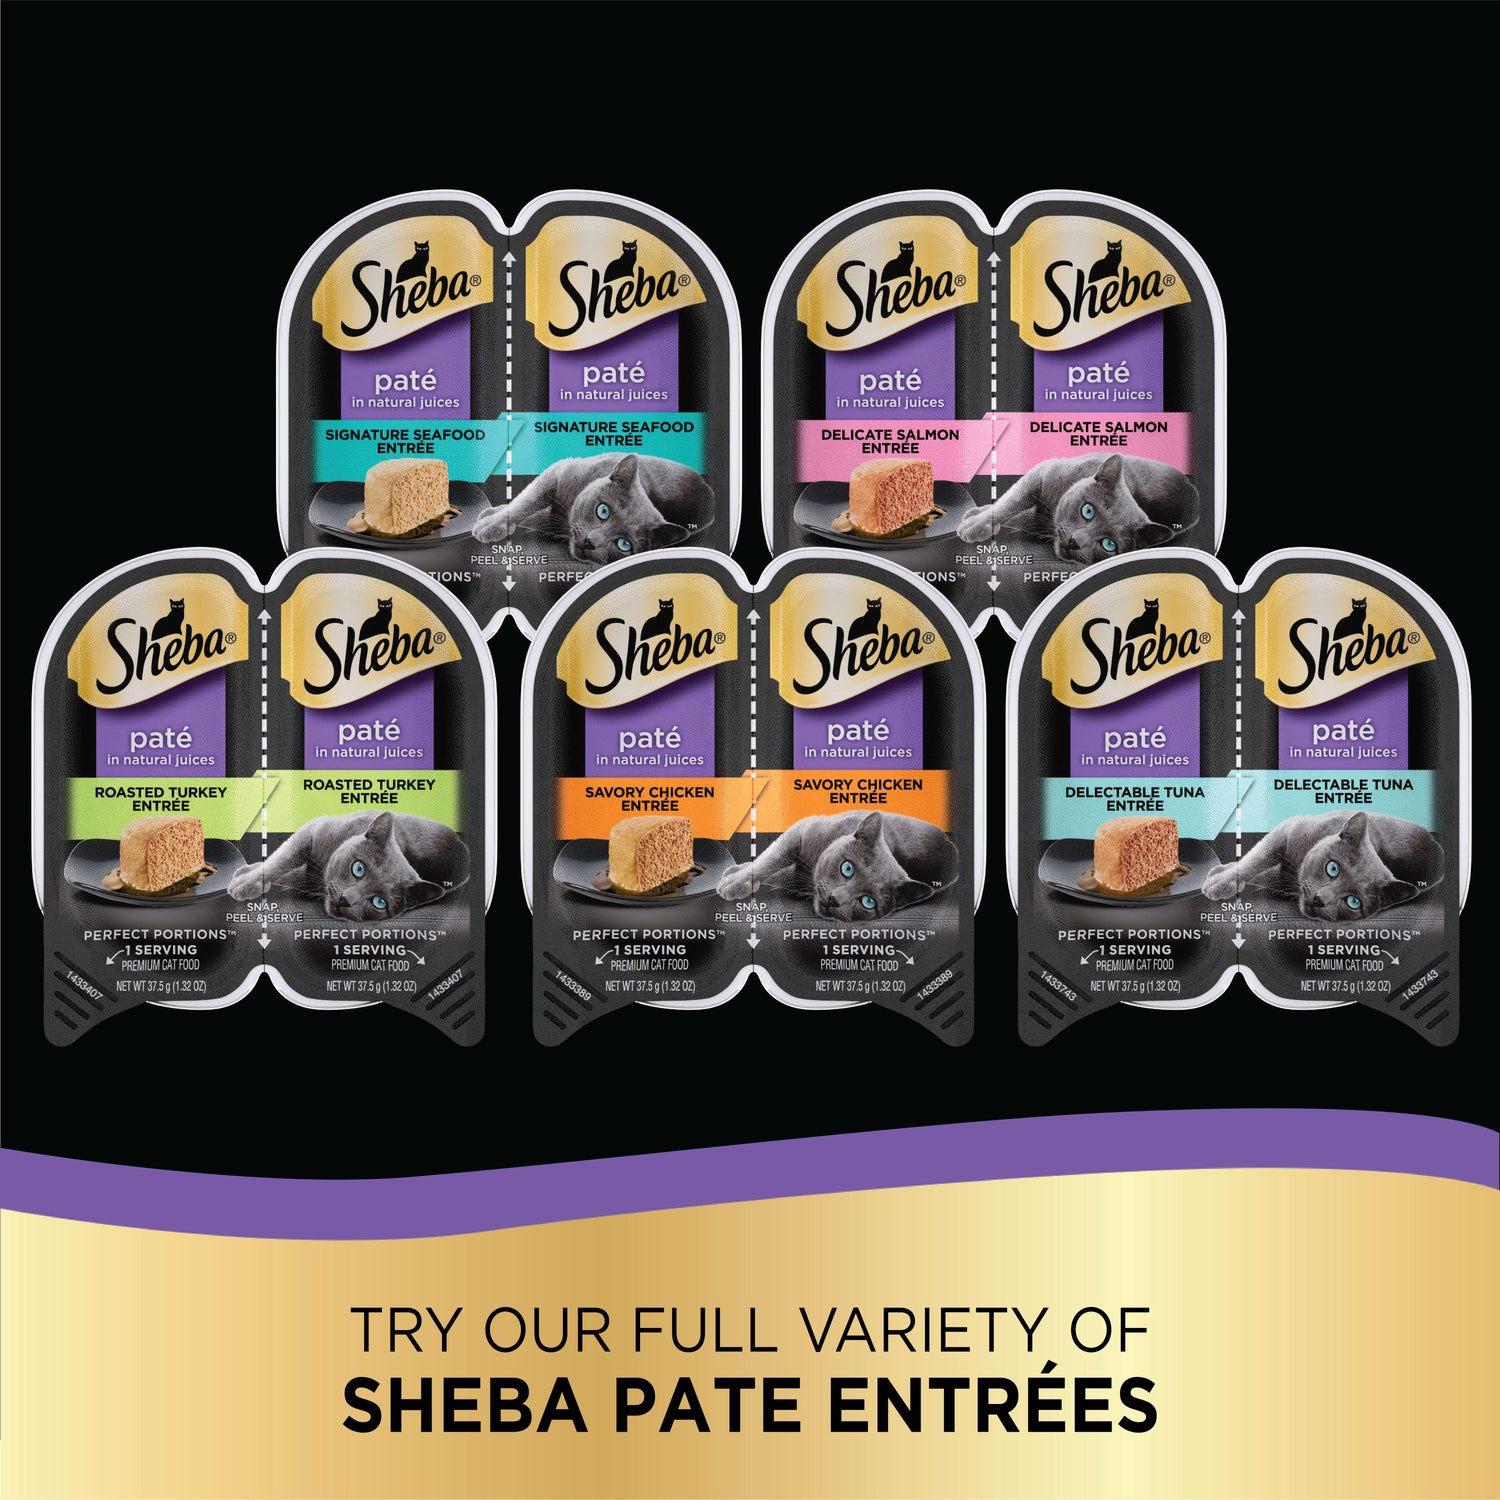 SHEBA Wet Cat Food Pate Variety Pack, Delicate Salmon and Tender Whitefish & Tuna Entrees, 2.6 Oz. PERFECT PORTIONS Twin Pack Trays